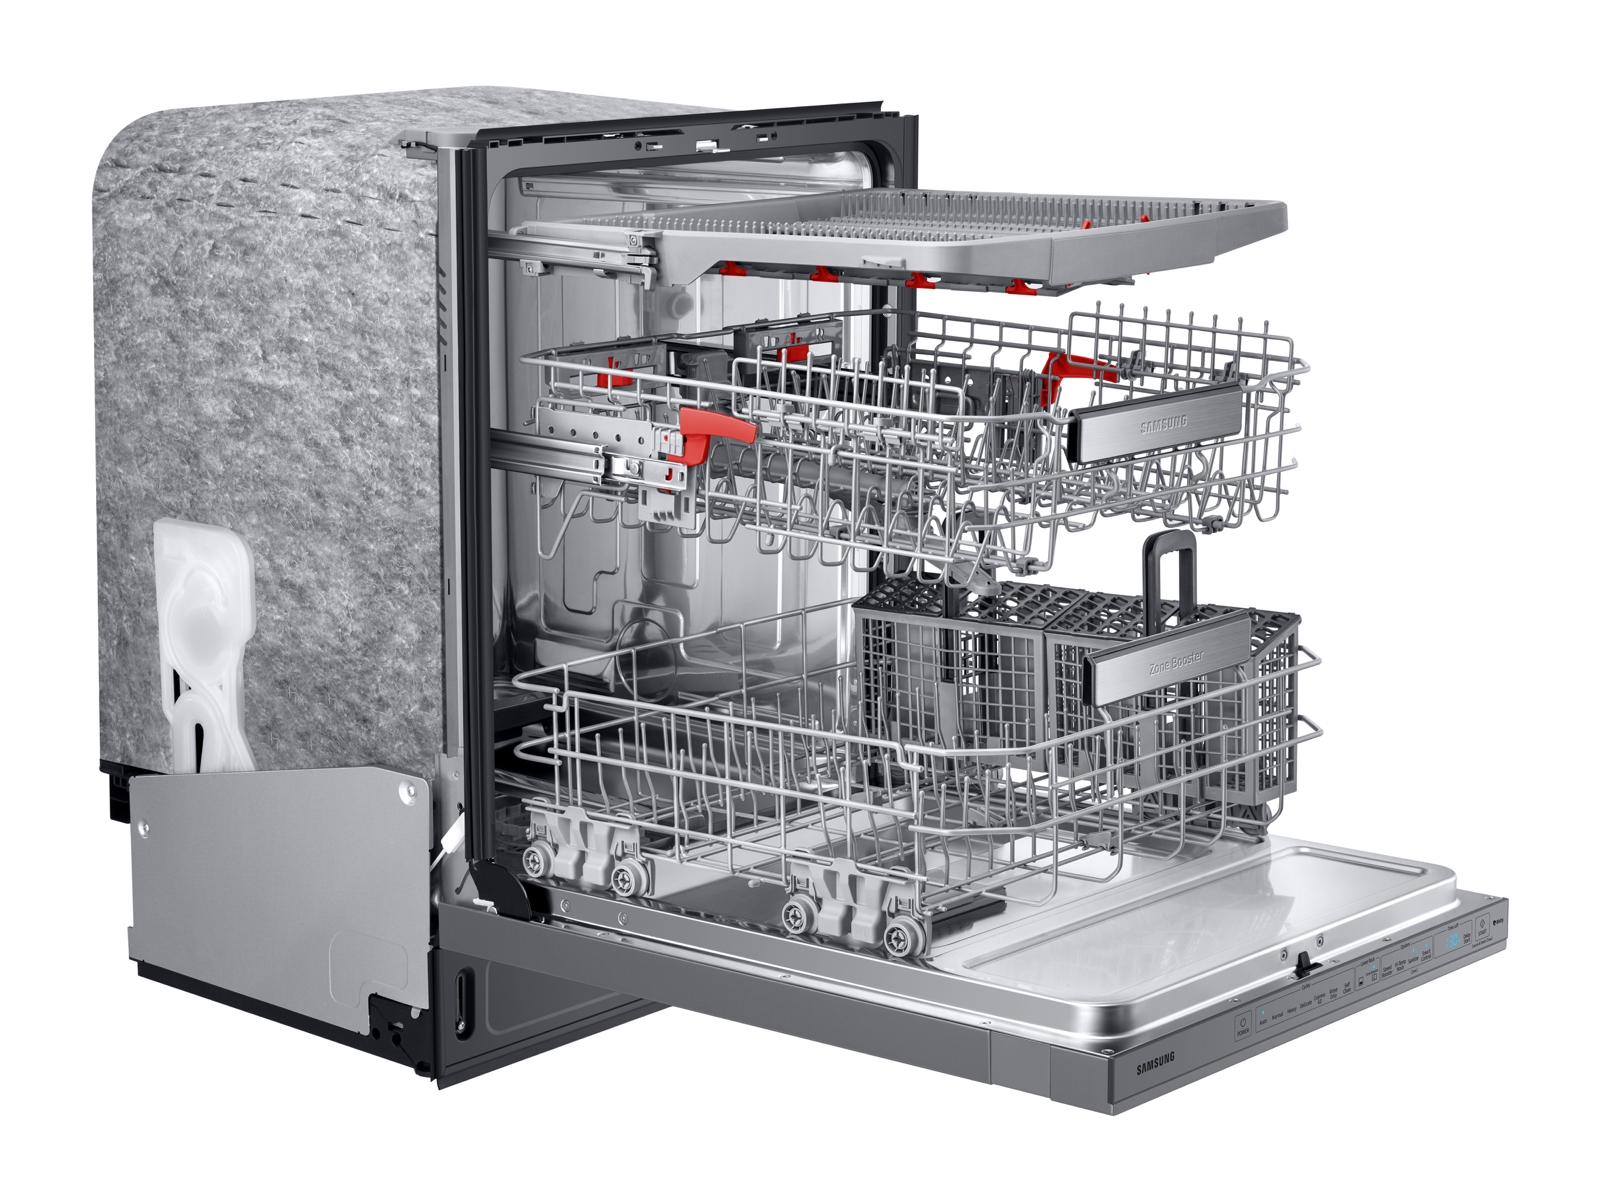 The Best Dishwashers in the UAE - Buy Online